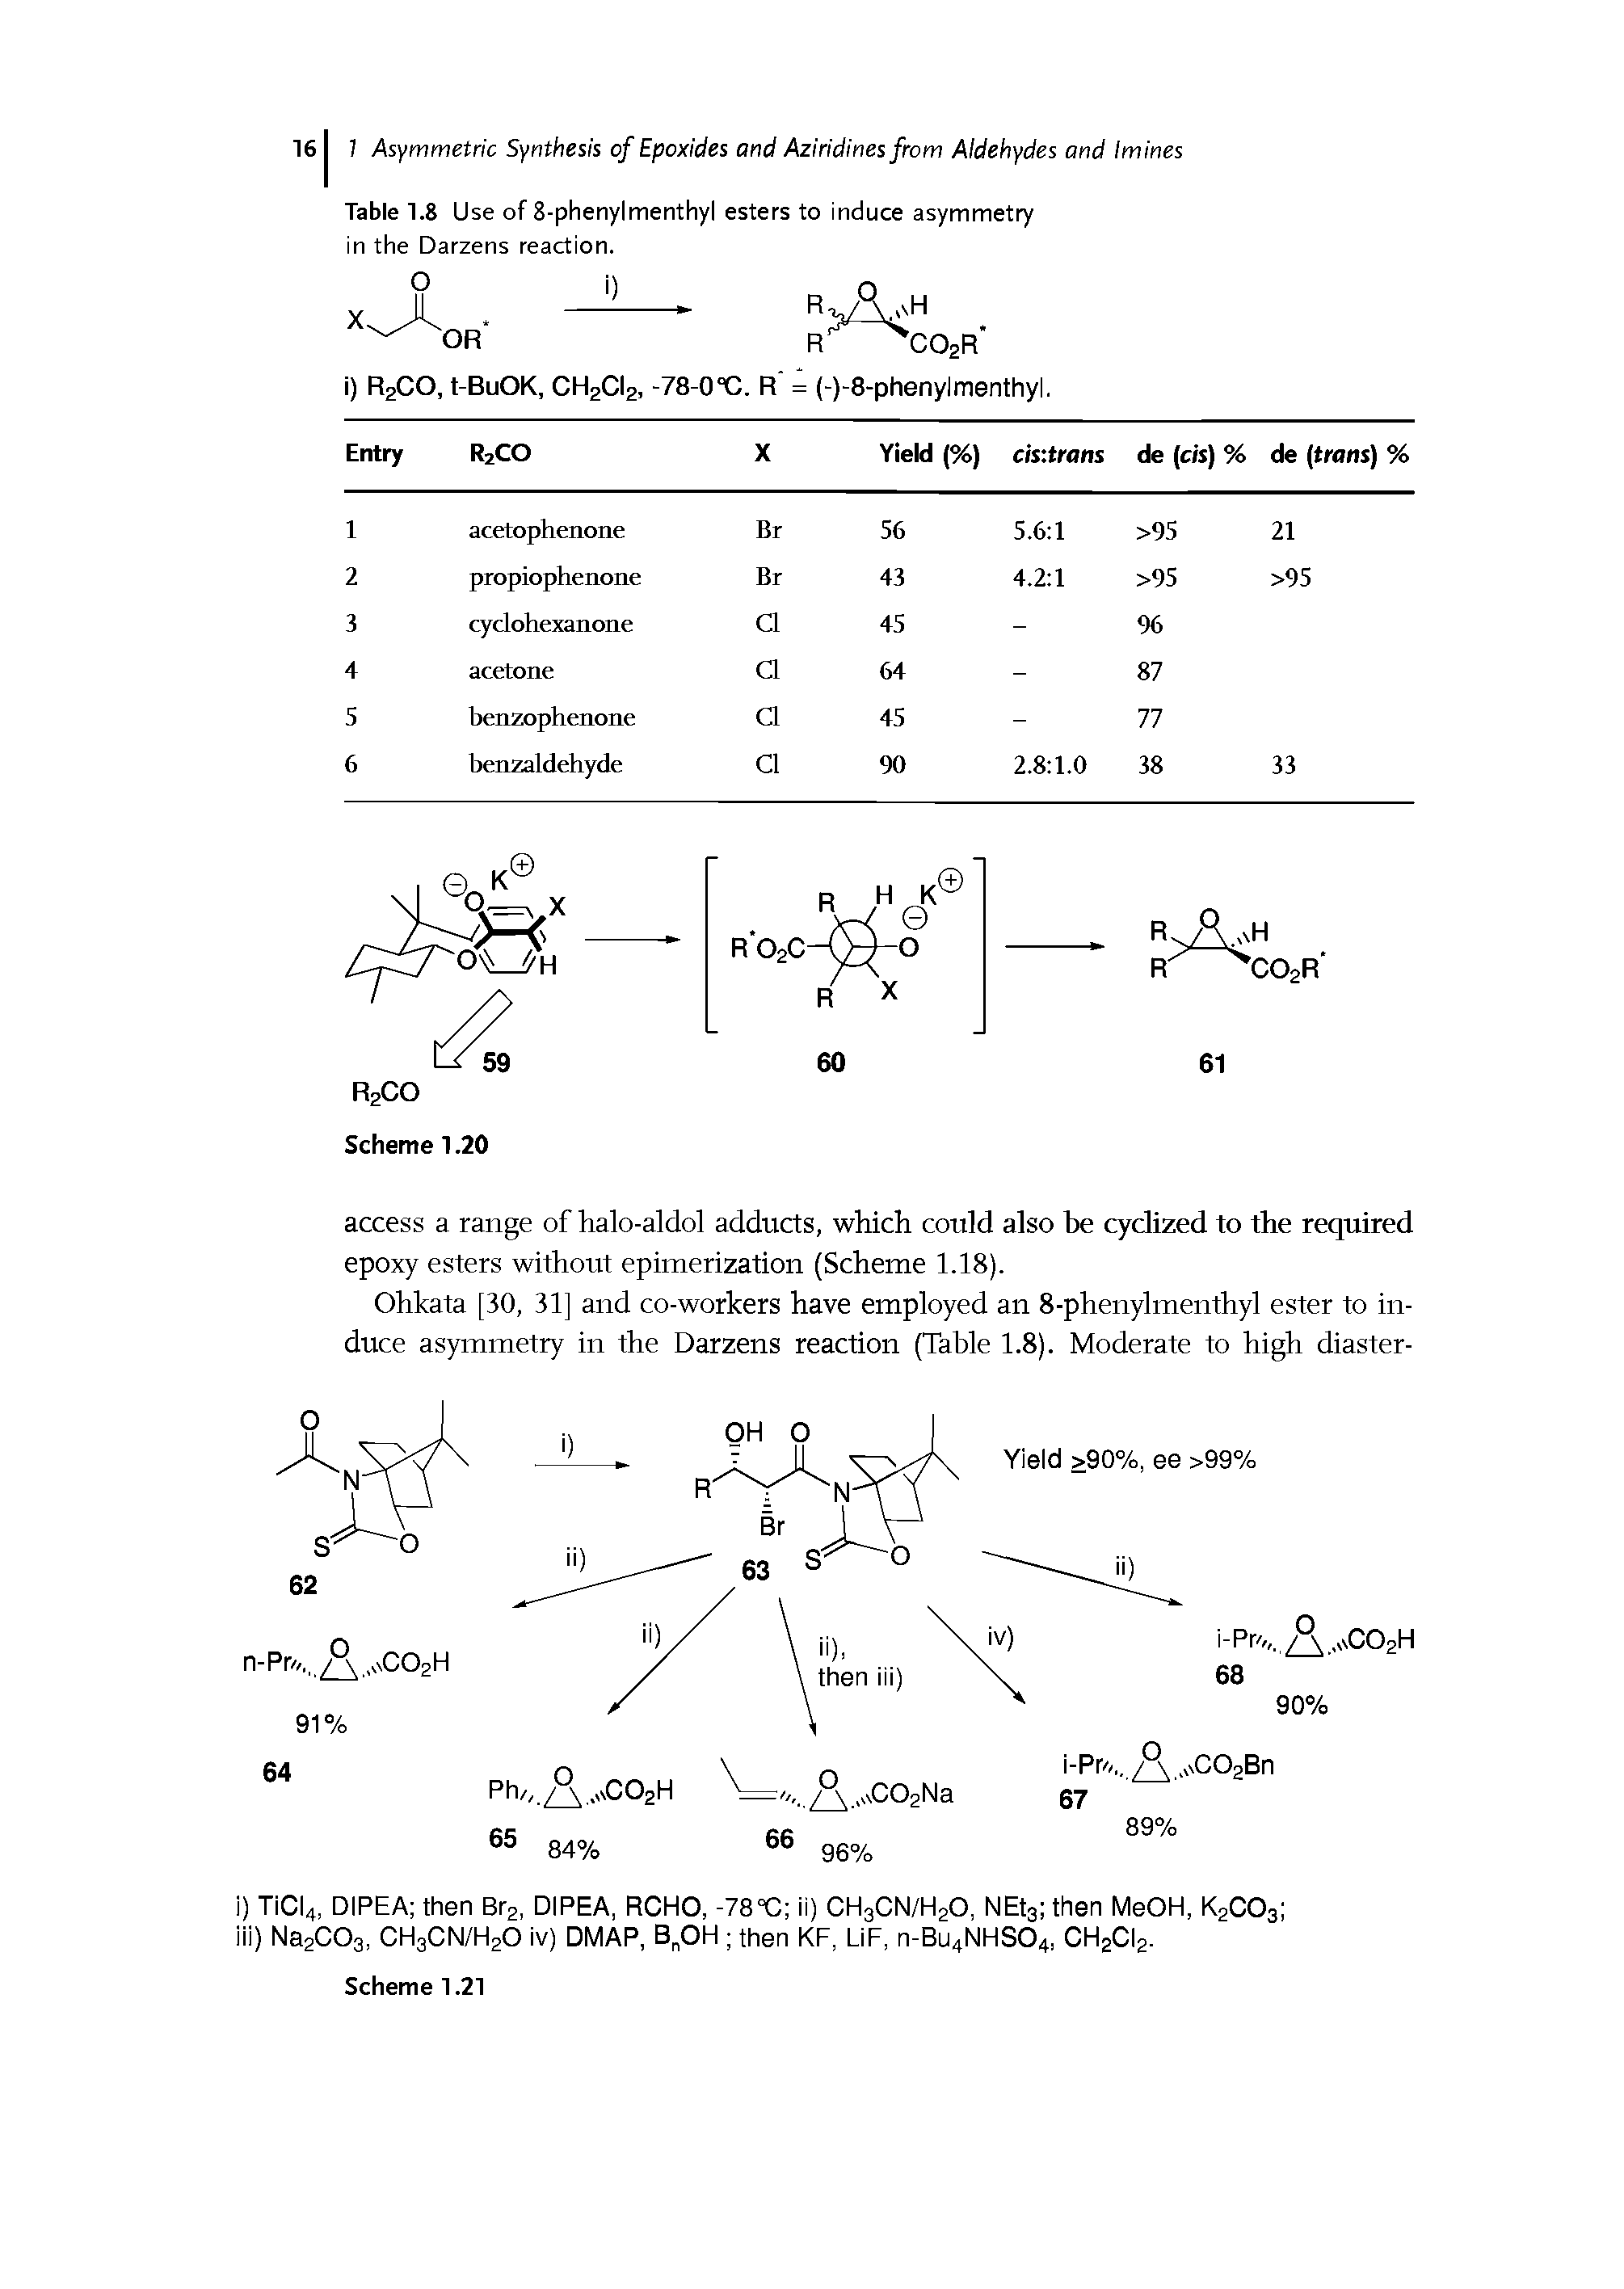 Table 1.8 Use of 8-phenylmenthyl esters to induce asymmetry in the Darzens reaction.